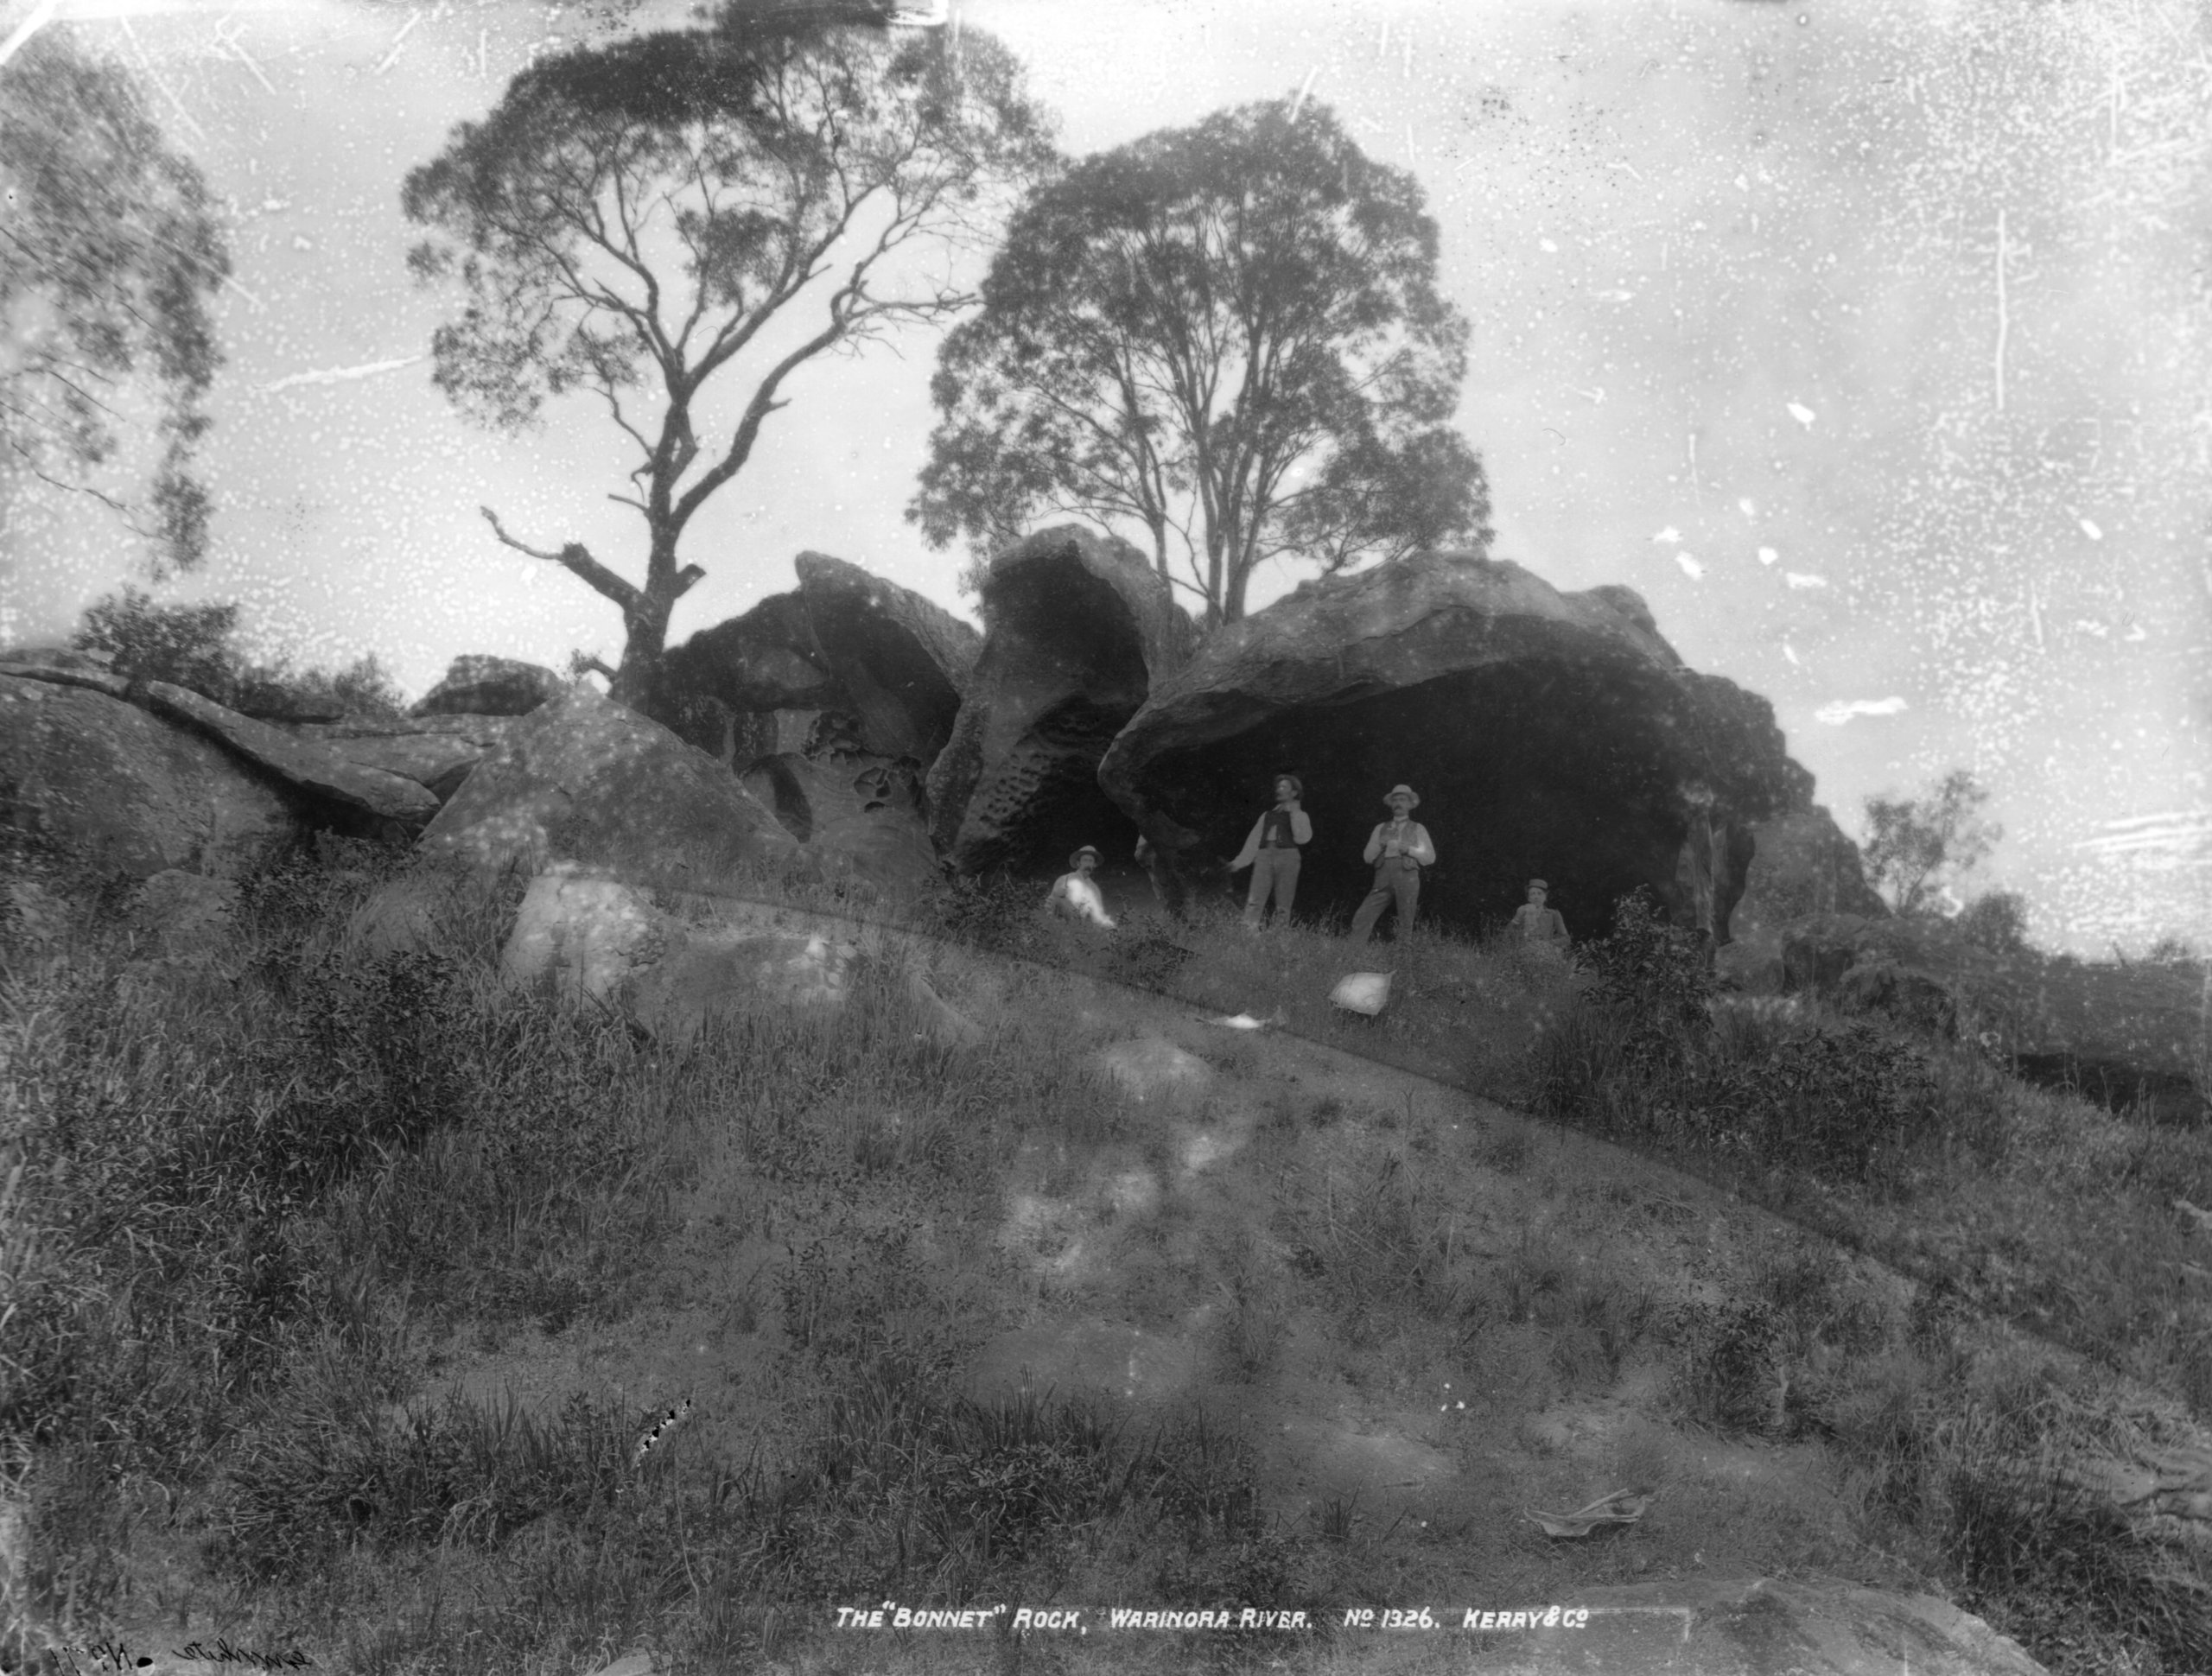  'The Bonnet Rock, Waranora River' by Kerry and Co from the Tyrrell Collection